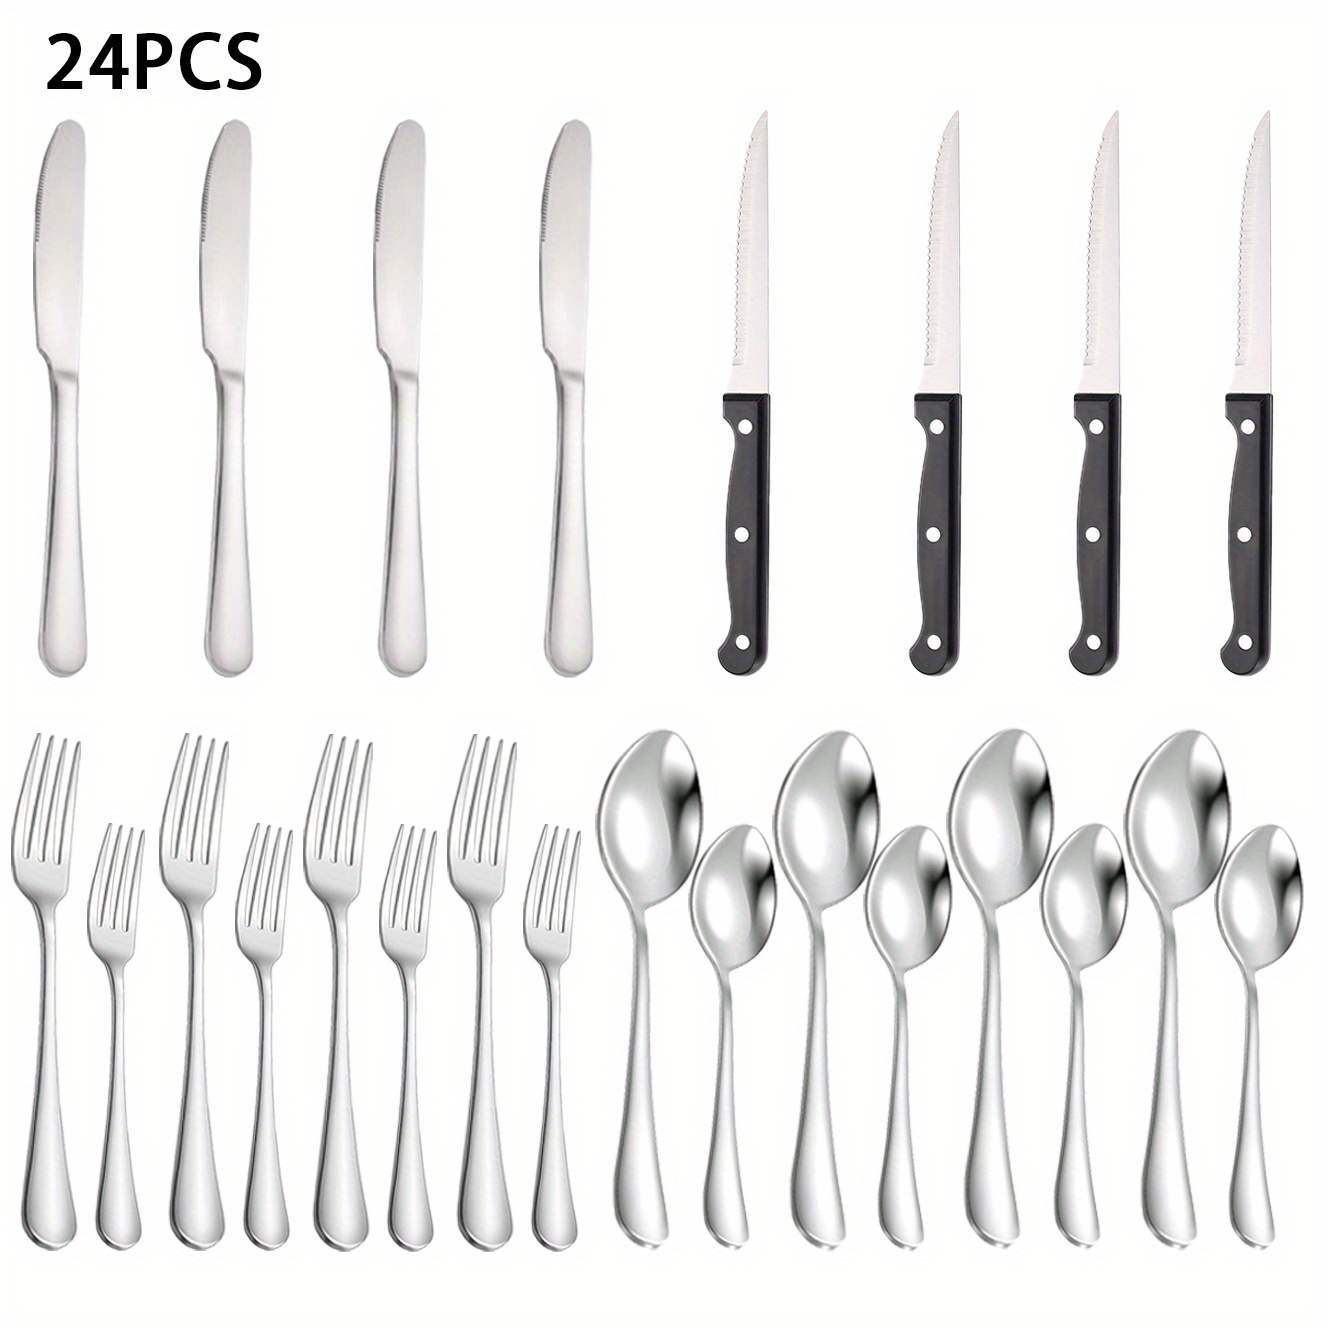 24 Pcs Silverware Set with Steak Knives Service for 4,Stainless